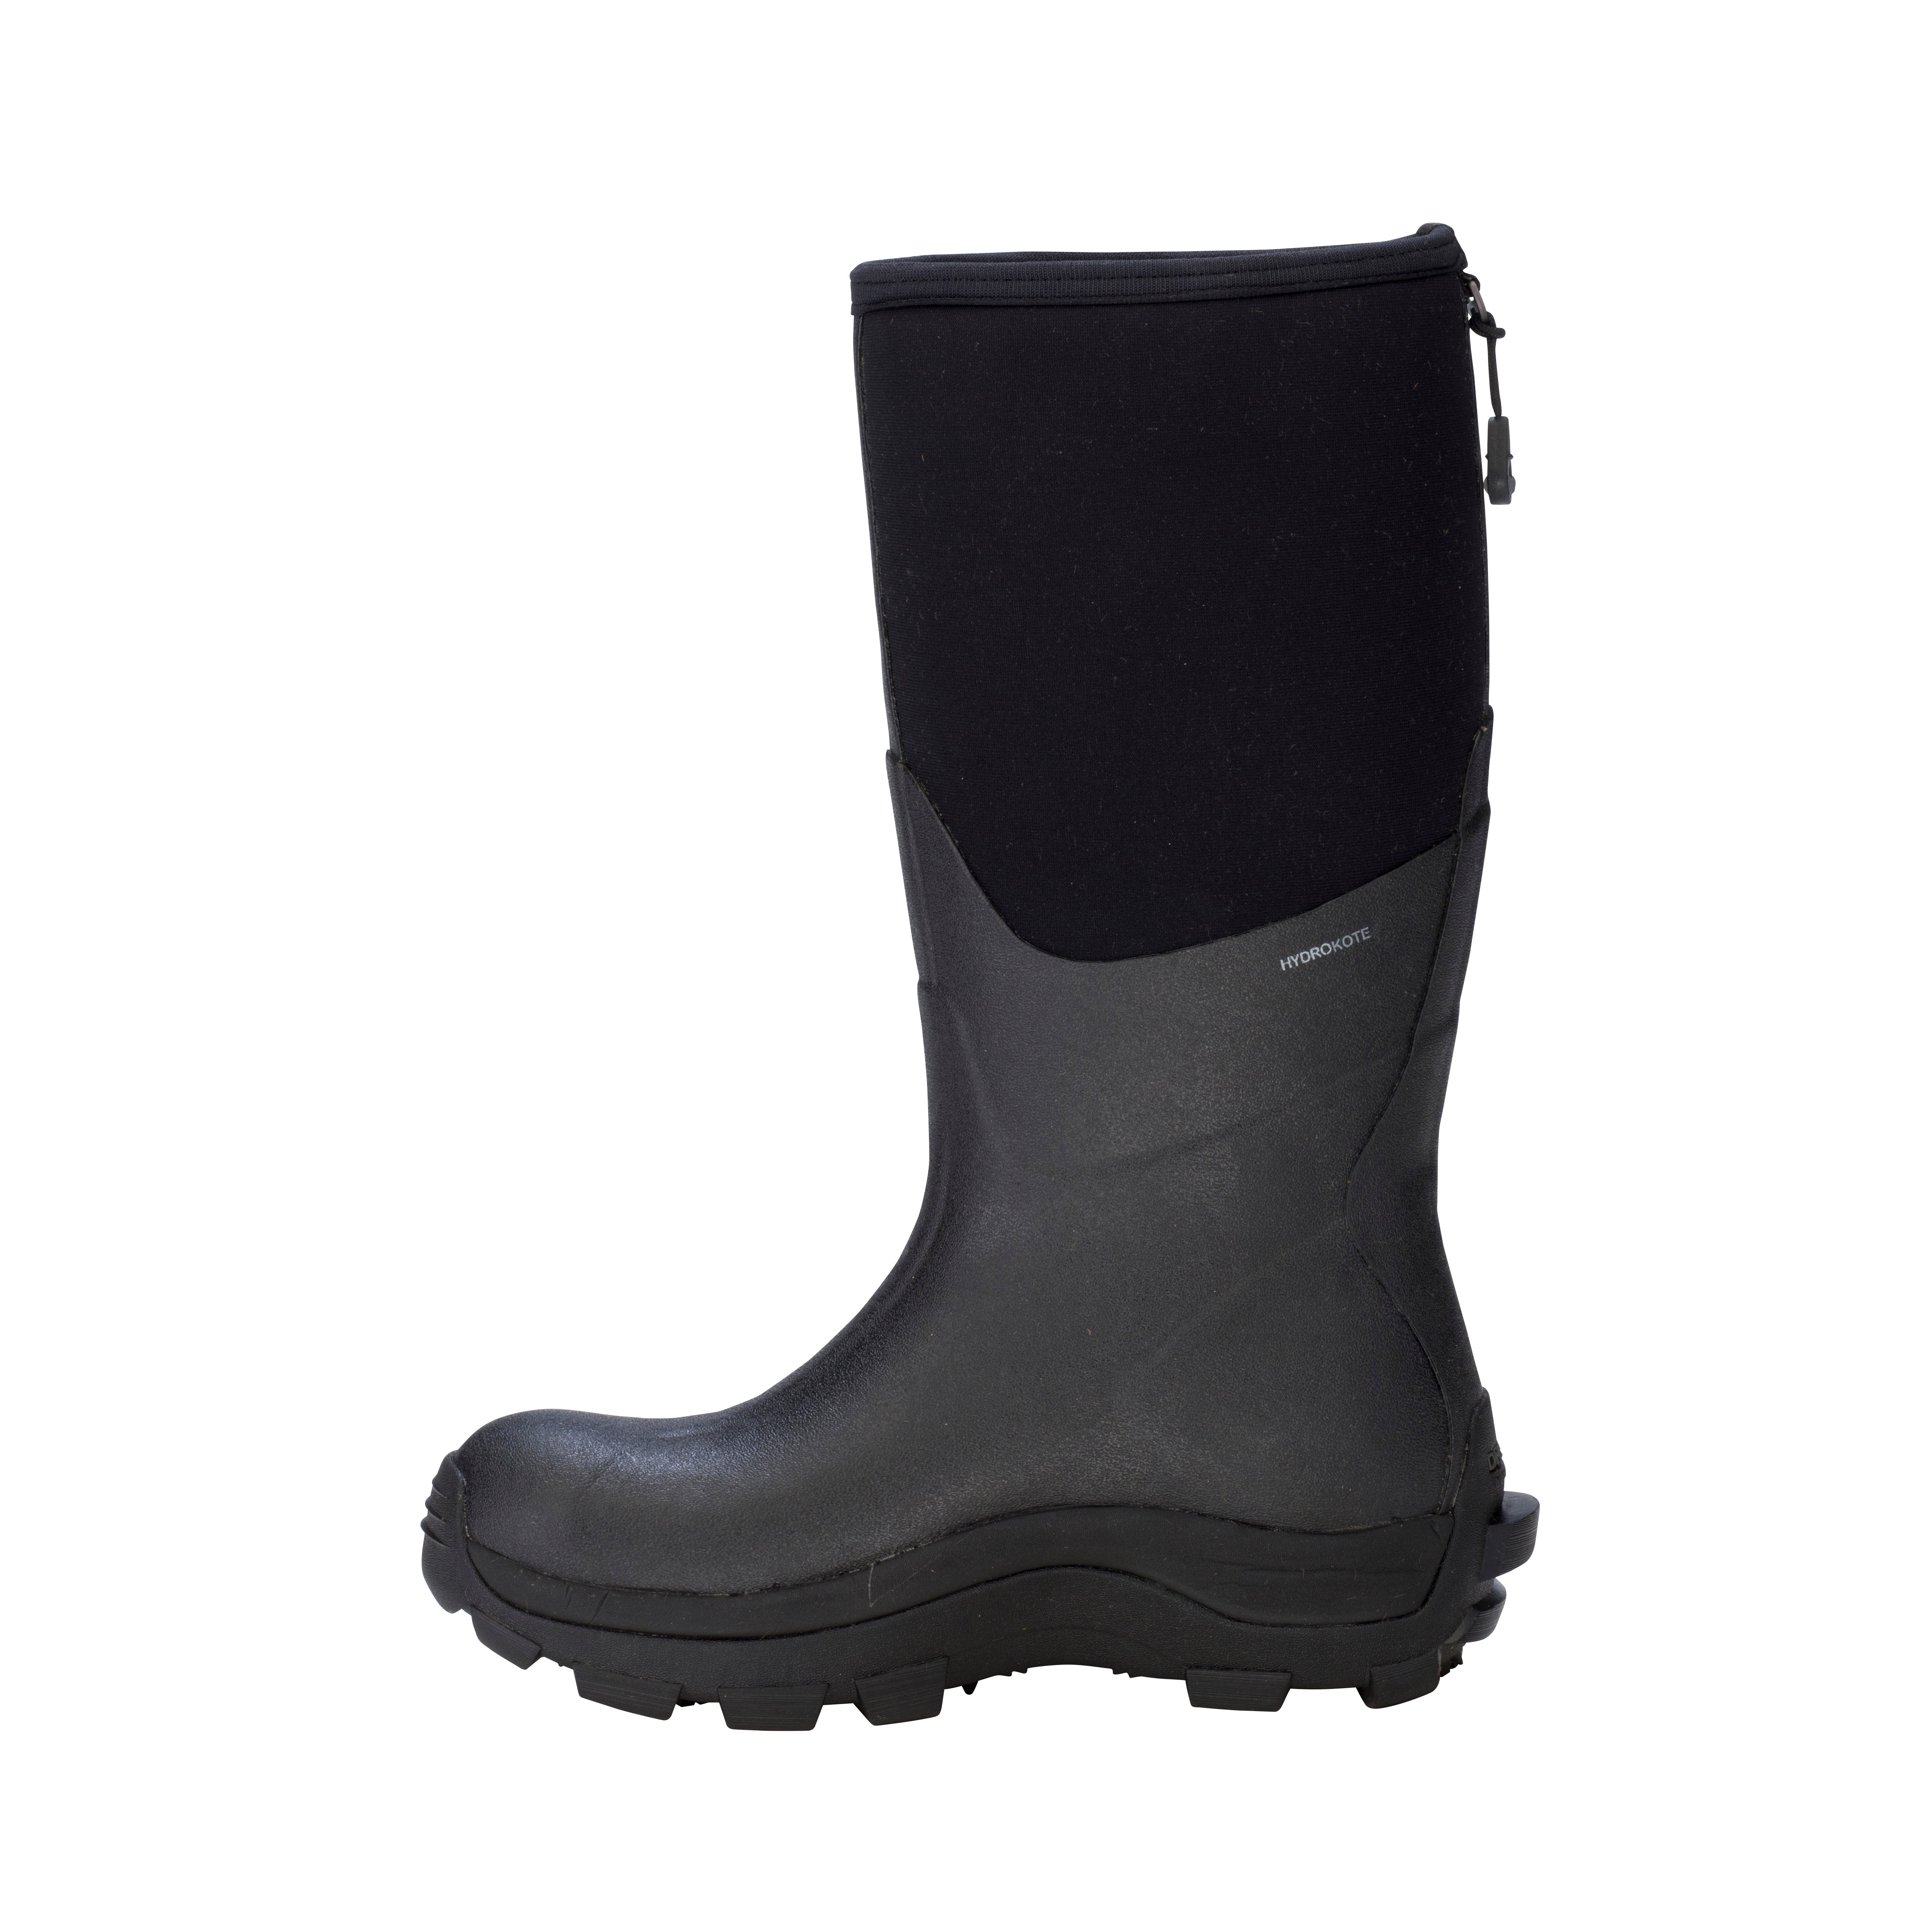 Women's DryShod Arctic Storm Hi Waterproof Insulated Muck Style Boots ARS-WH-PN